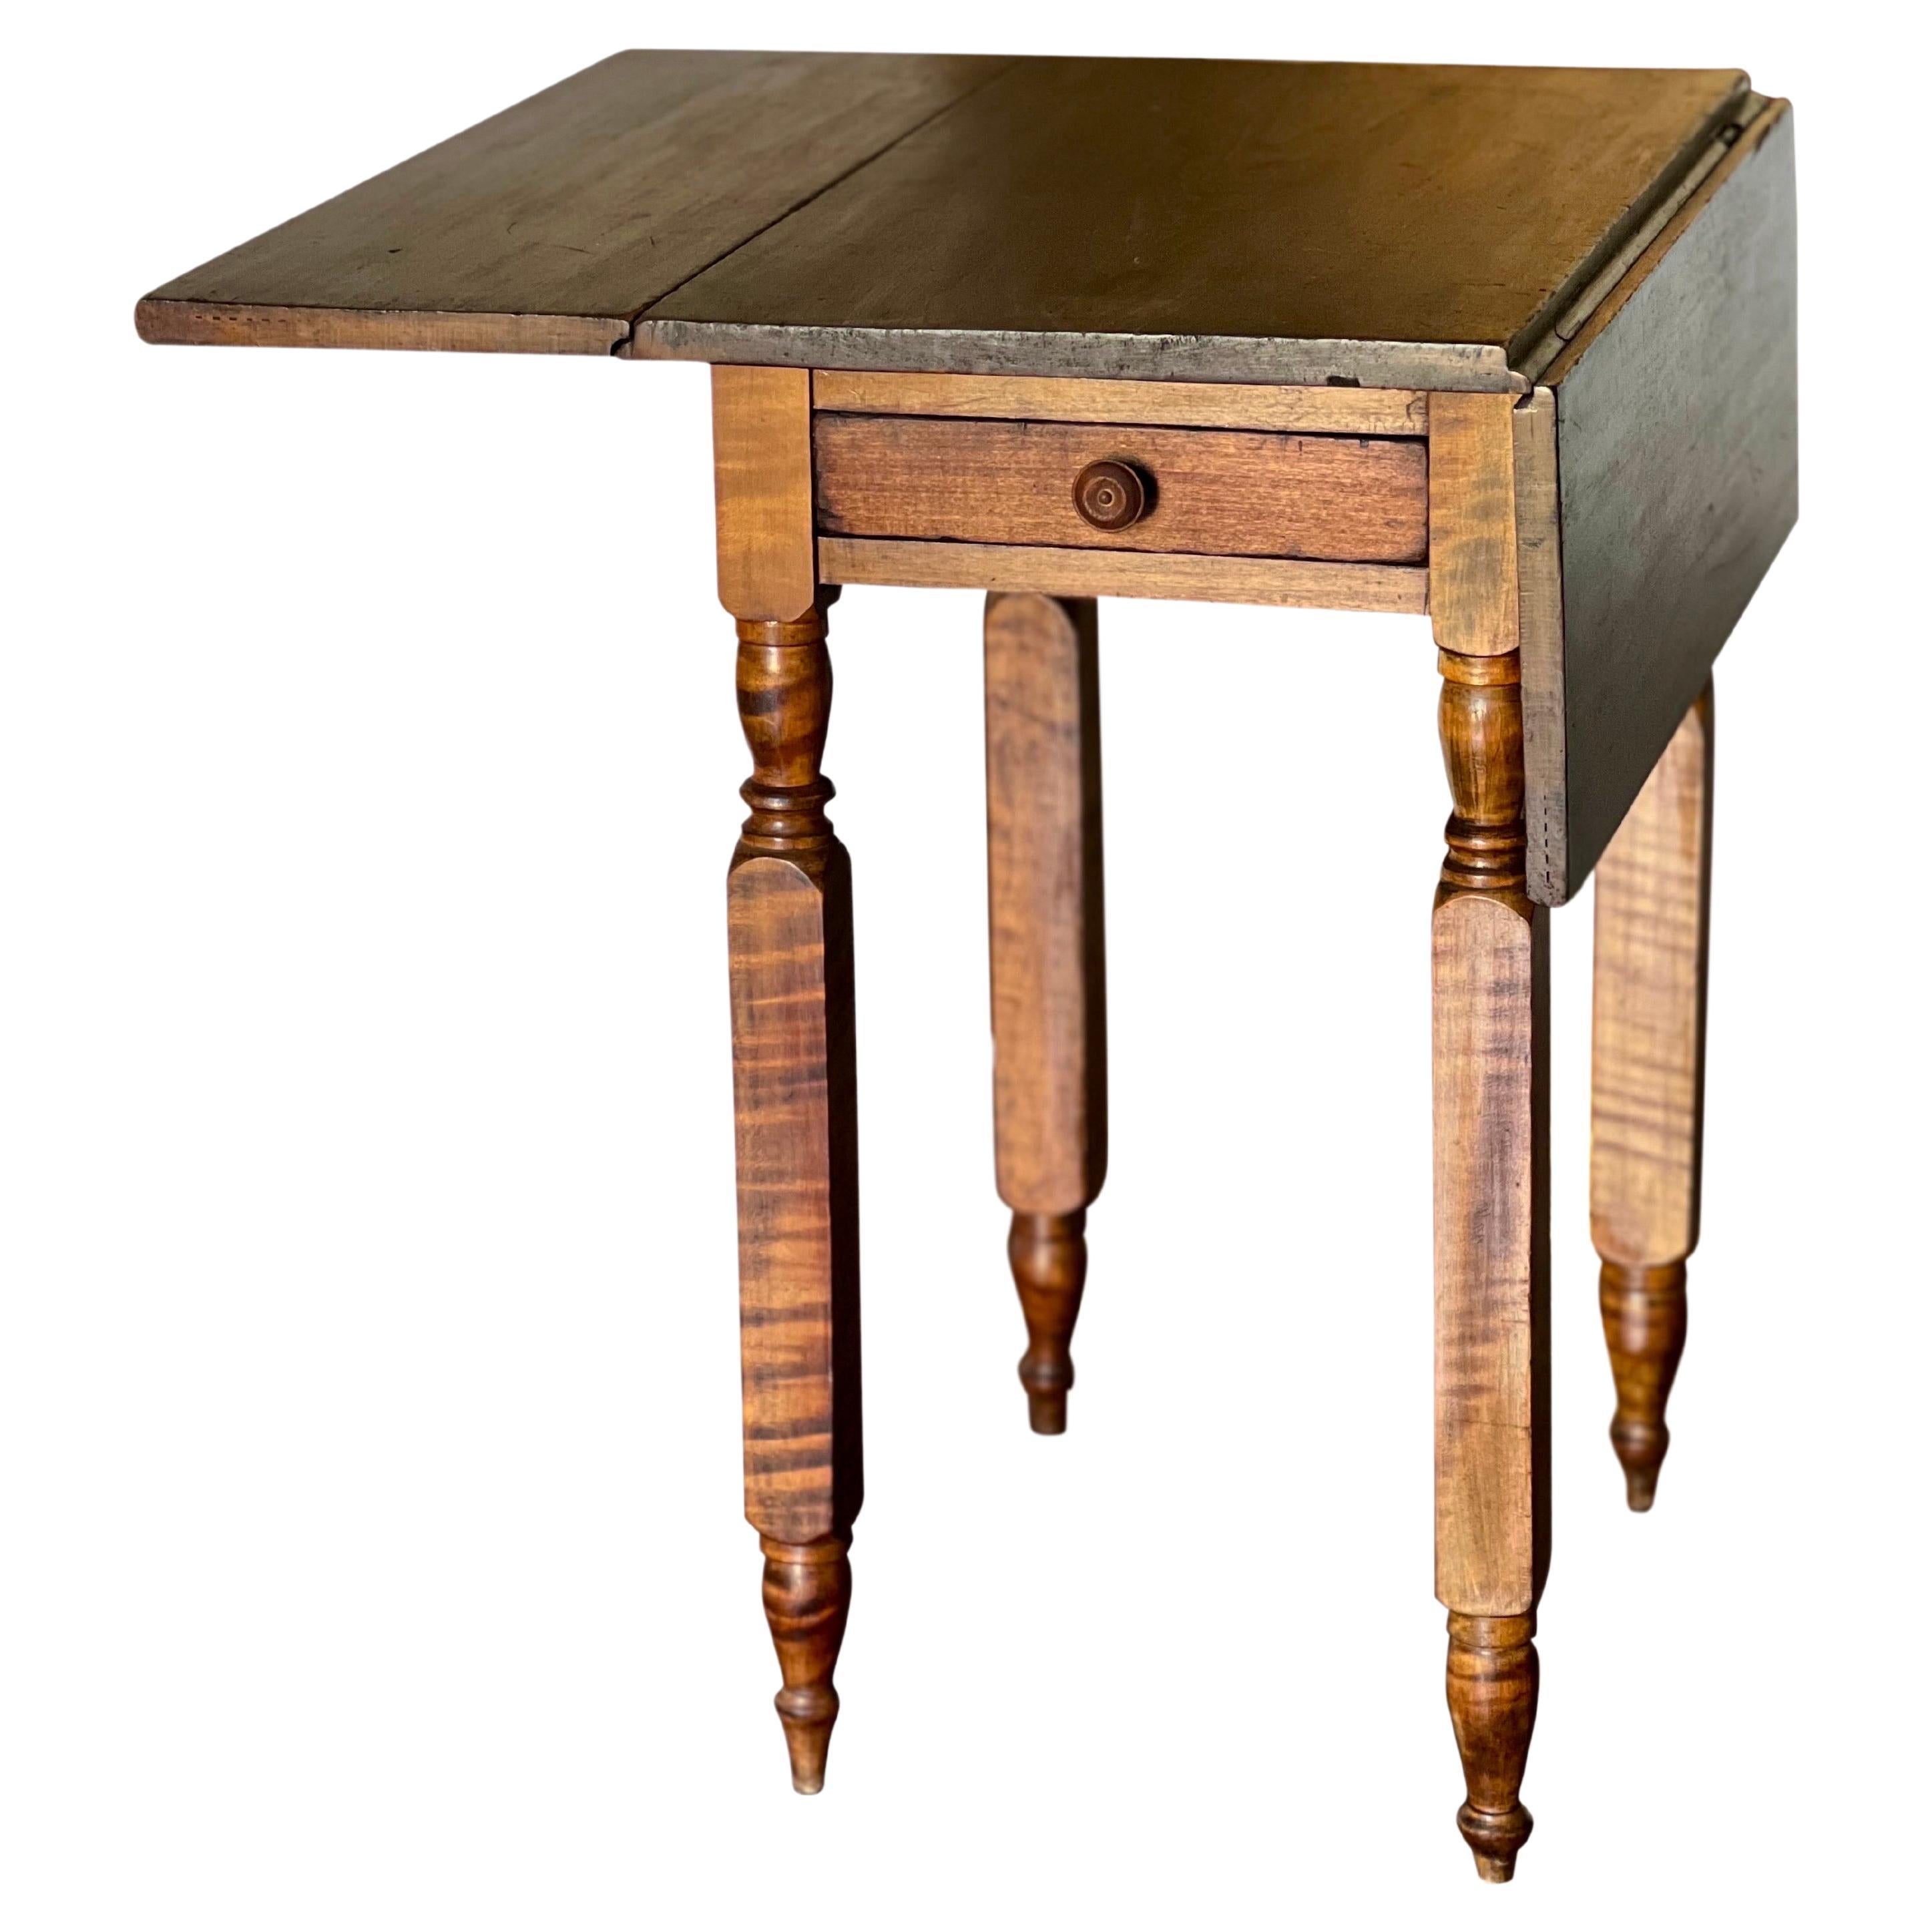 Antique French Provincial Rustic Walnut Drop-Leaf Farmhouse Table For Sale